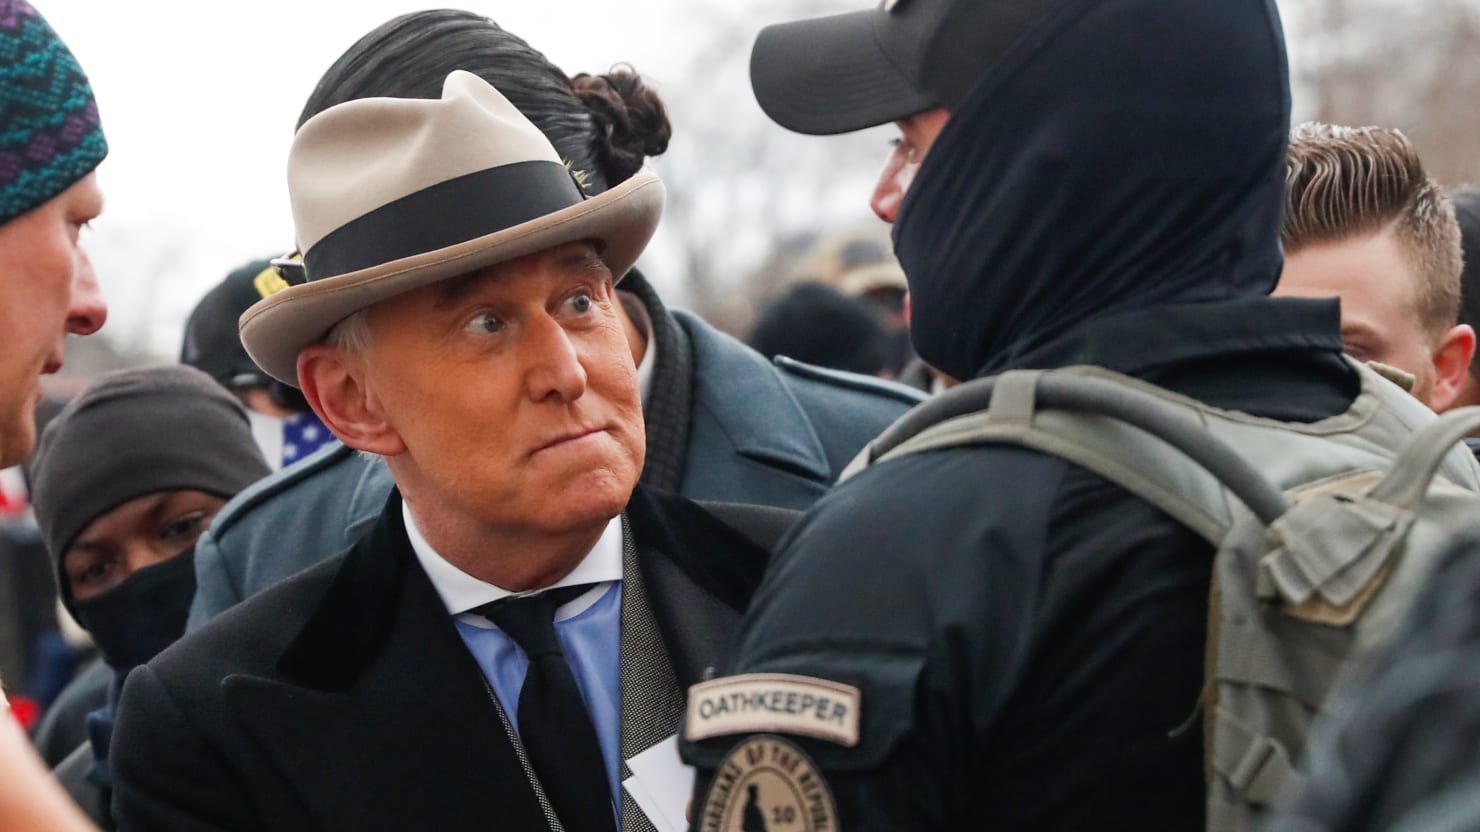 Six oath keepers who protected Roger Stone stormed the Capitol, New York Times reports